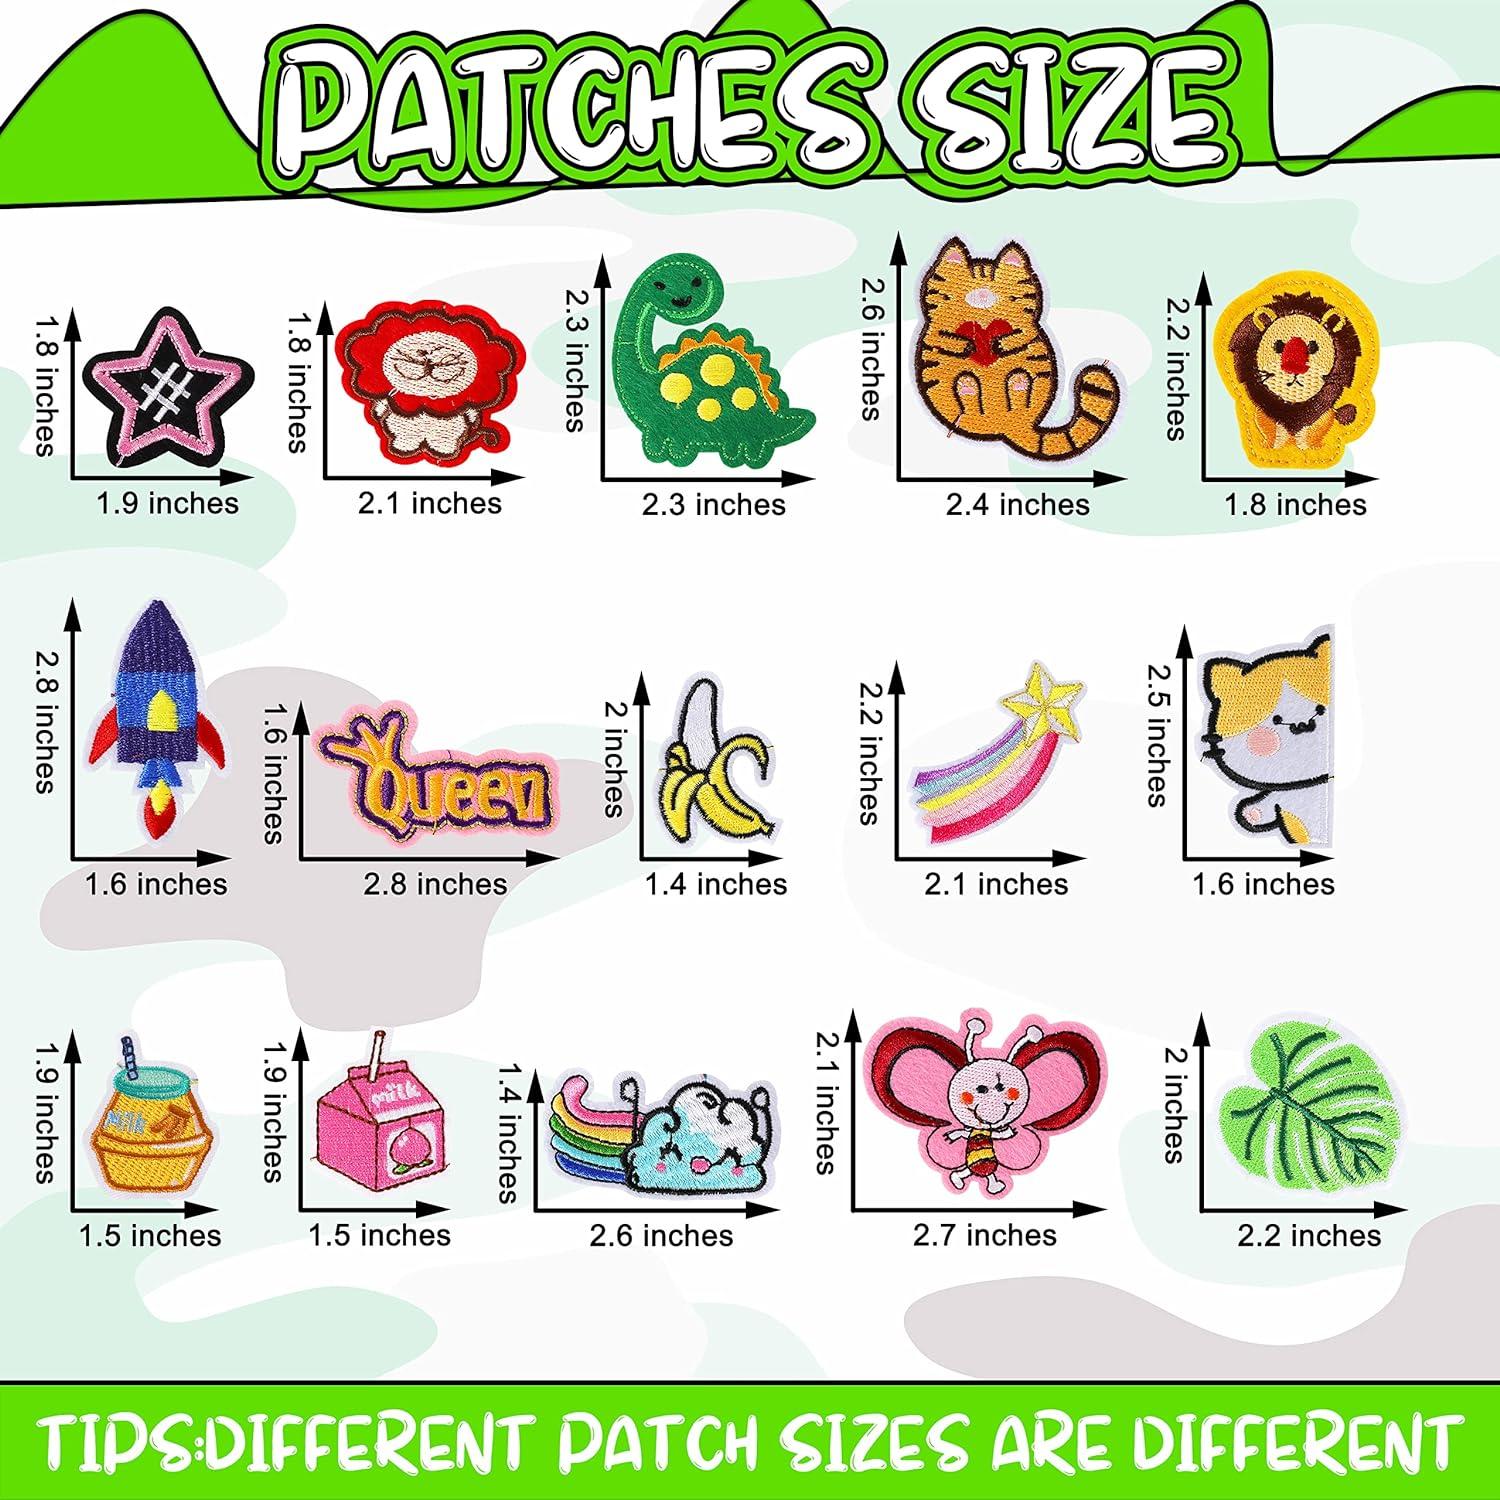 The Amazing Patches Iron on Patches for Clothing DIY Sew on Patches Applique Patch Clothing Repair Patches